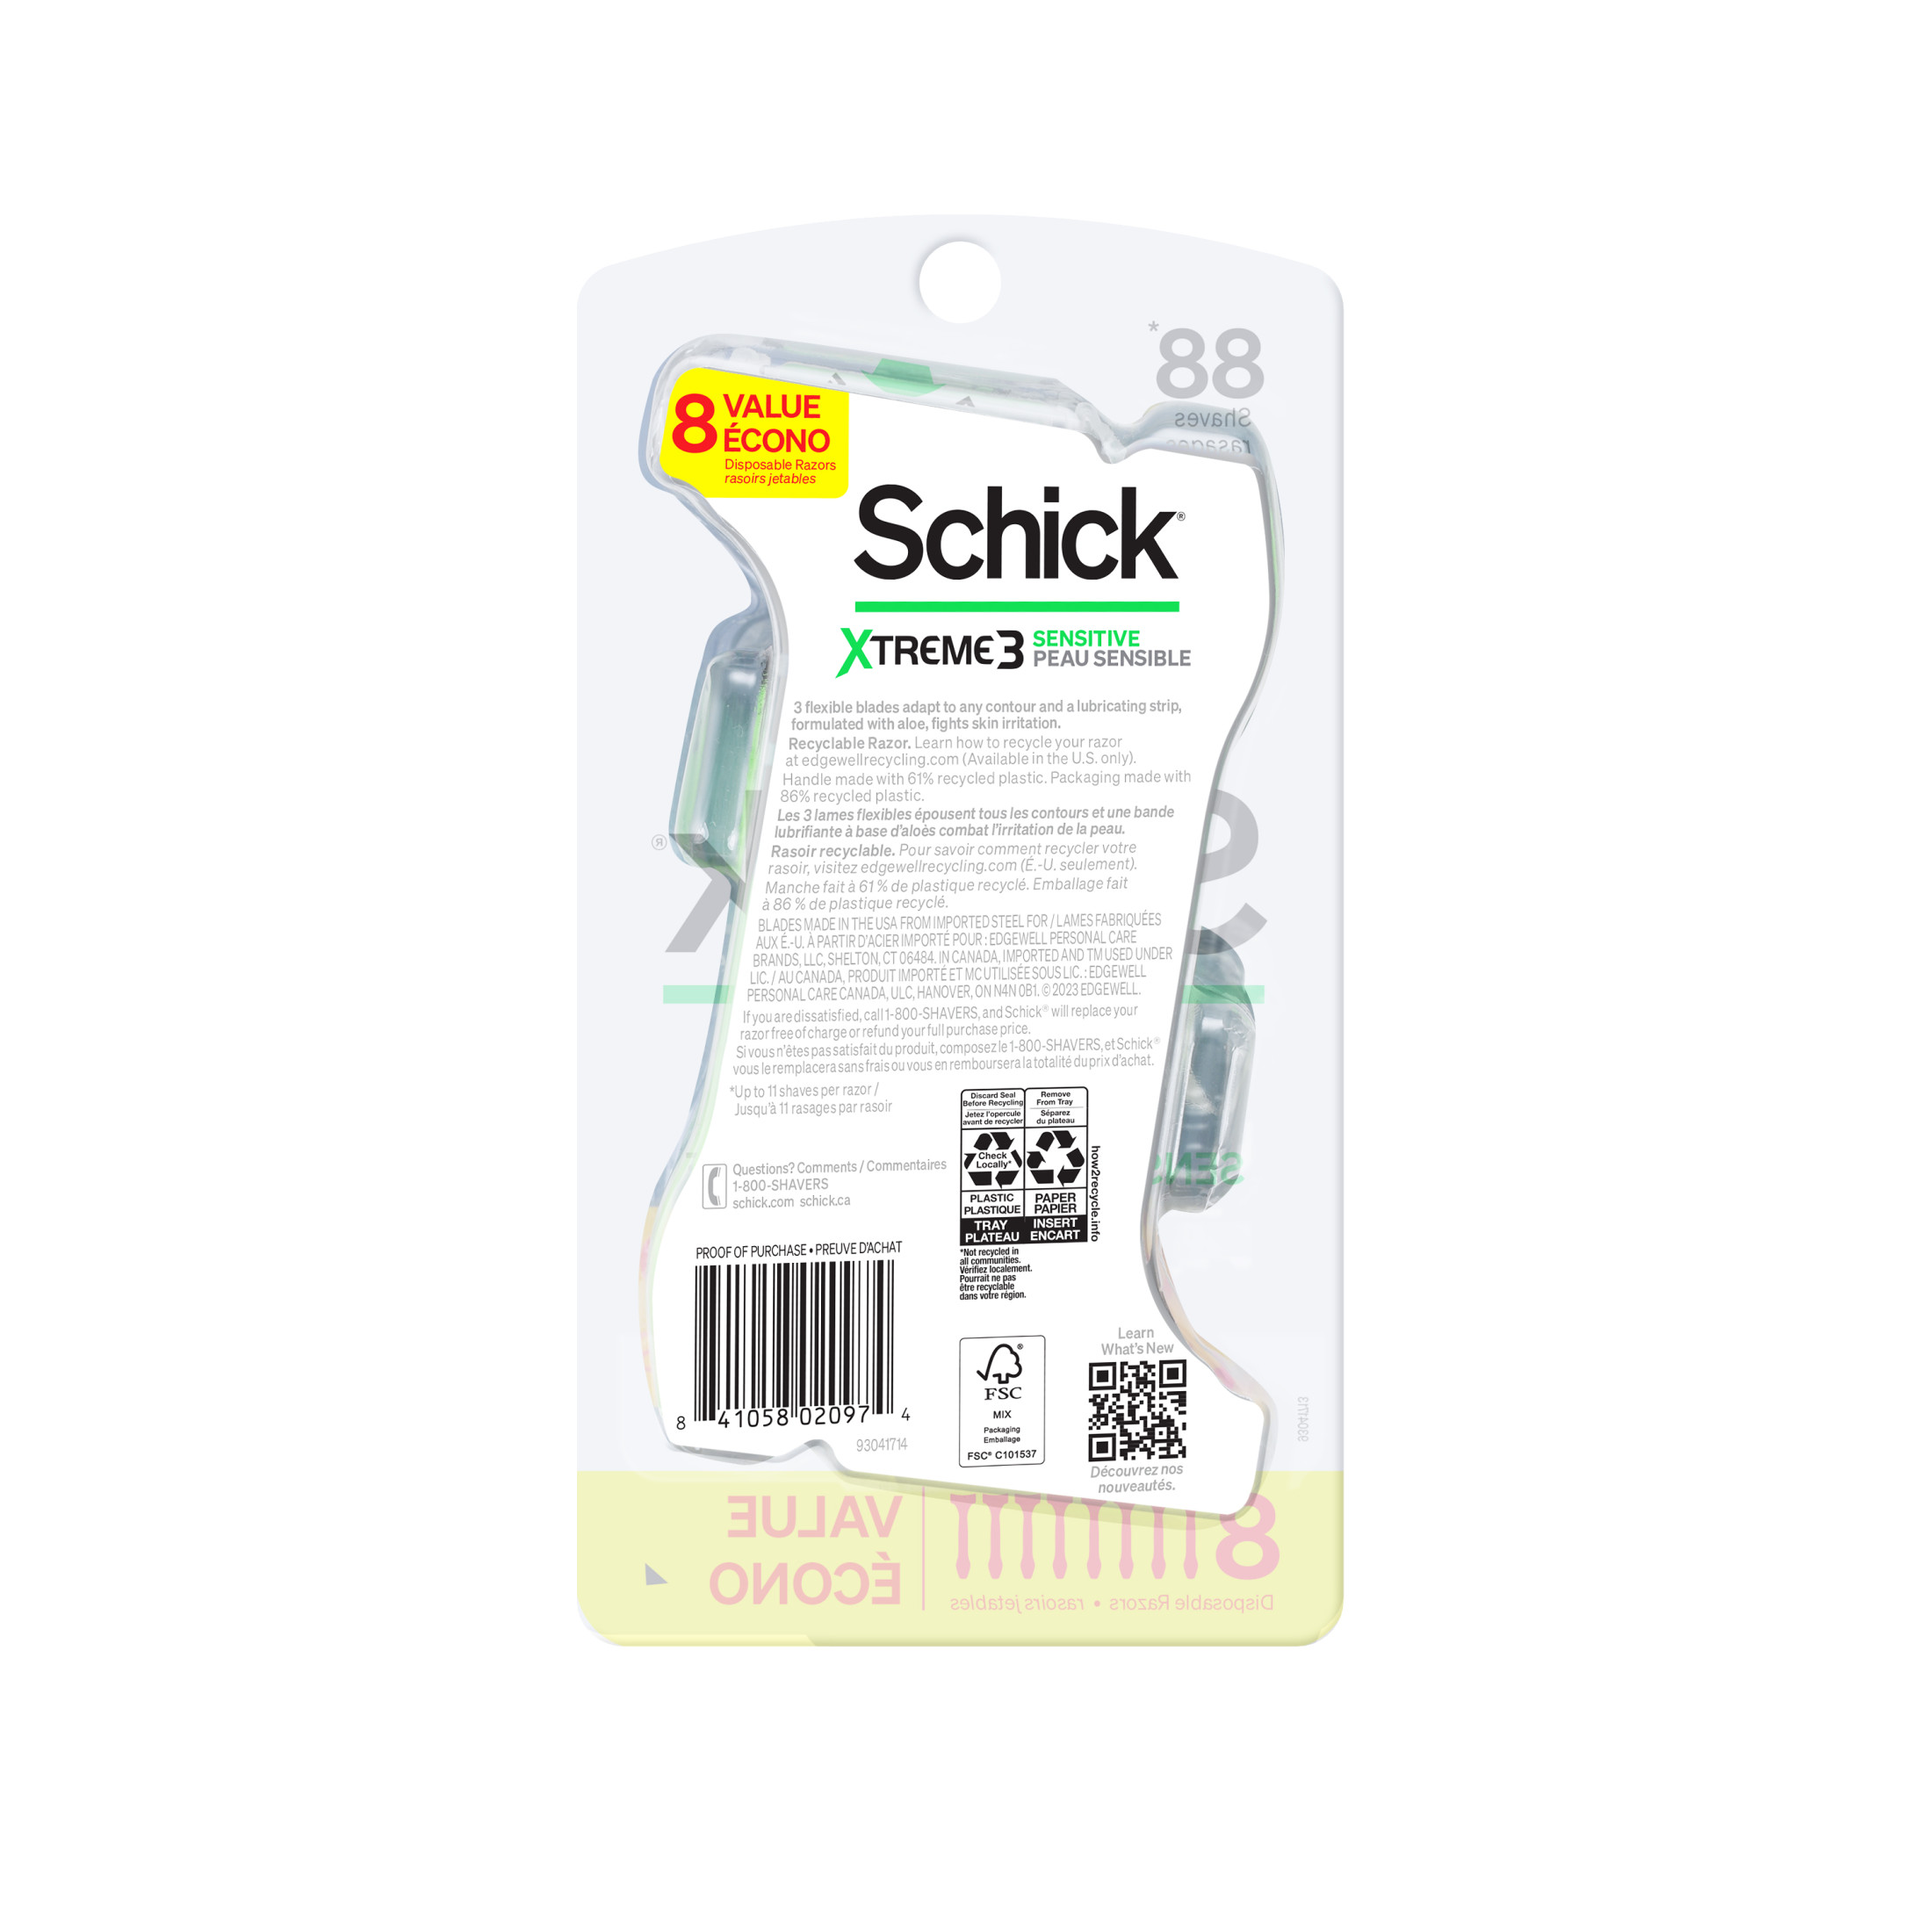 Schick Xtreme 3 Blade Disposable Razors for Men, 8 ct, Men's Sensitive Skin Razor Pack, Protects Skin from Irritation - image 11 of 11